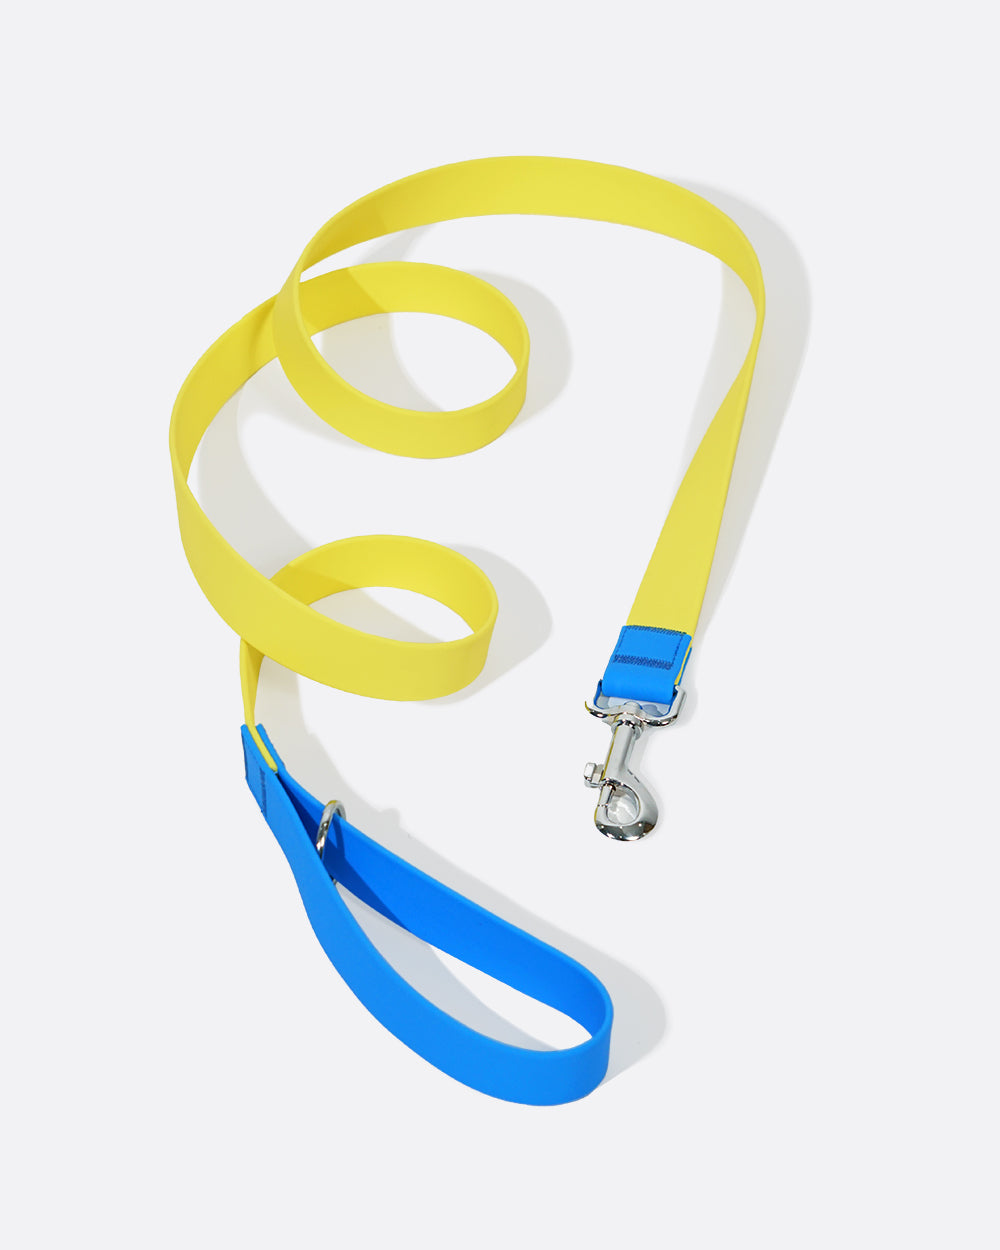 A durable and waterproof dog leash designed for outdoor adventures, with a 360° Rotating Metal Clasp, yellow with blue color match